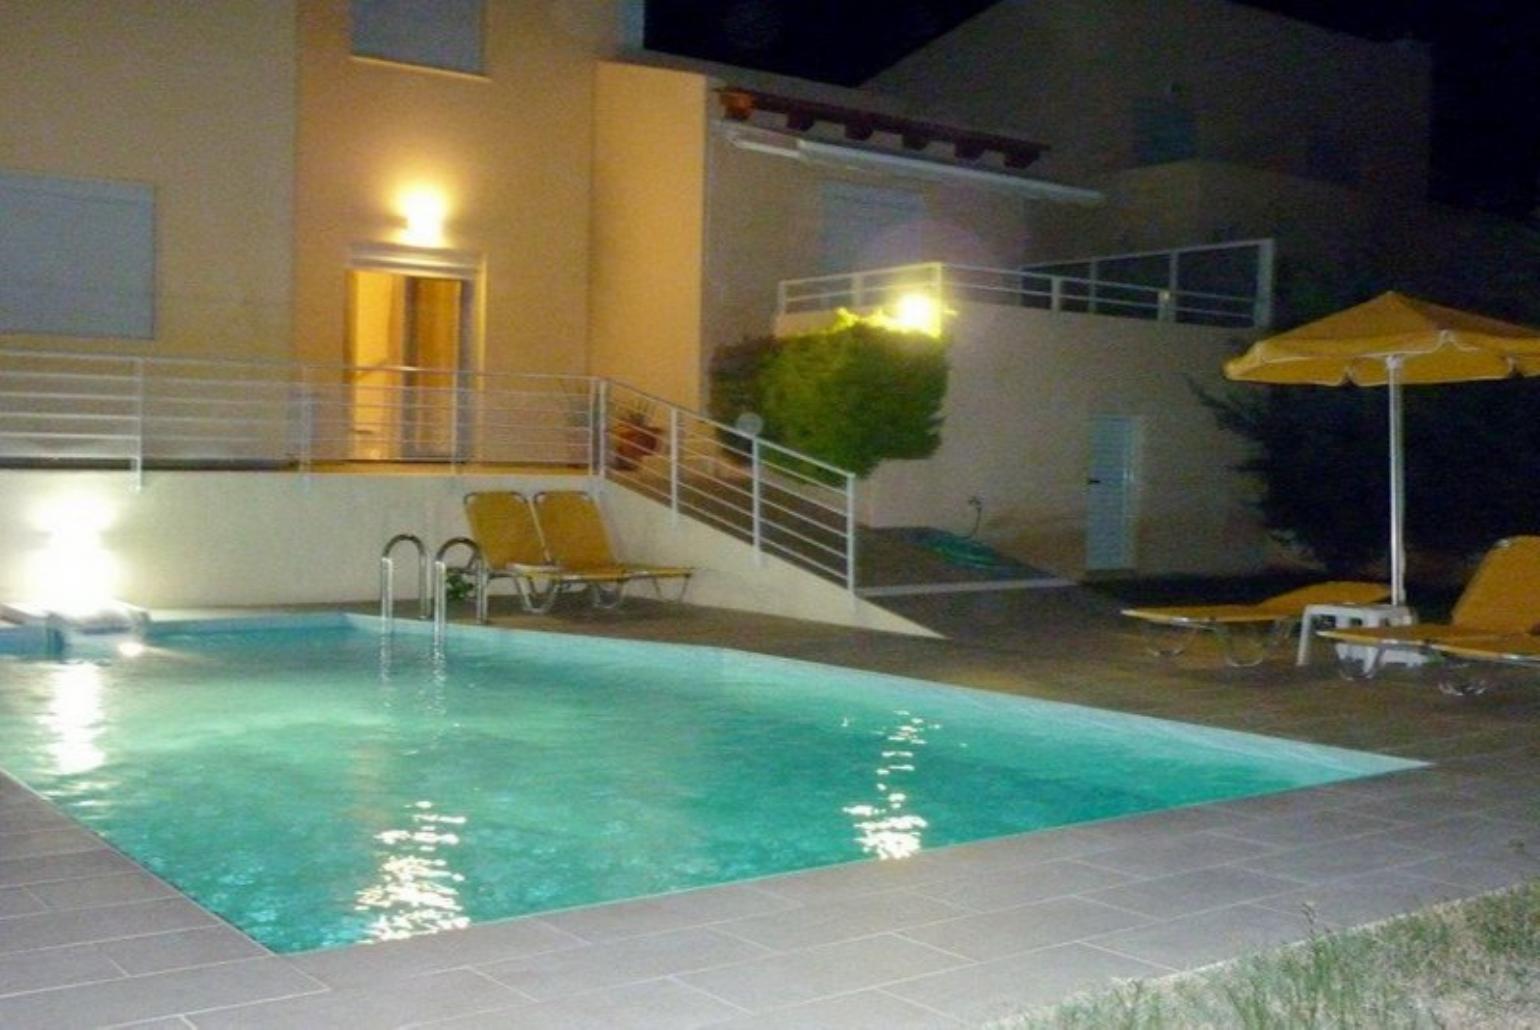 Beautiful villa with private pool, terrace, and lawn at night